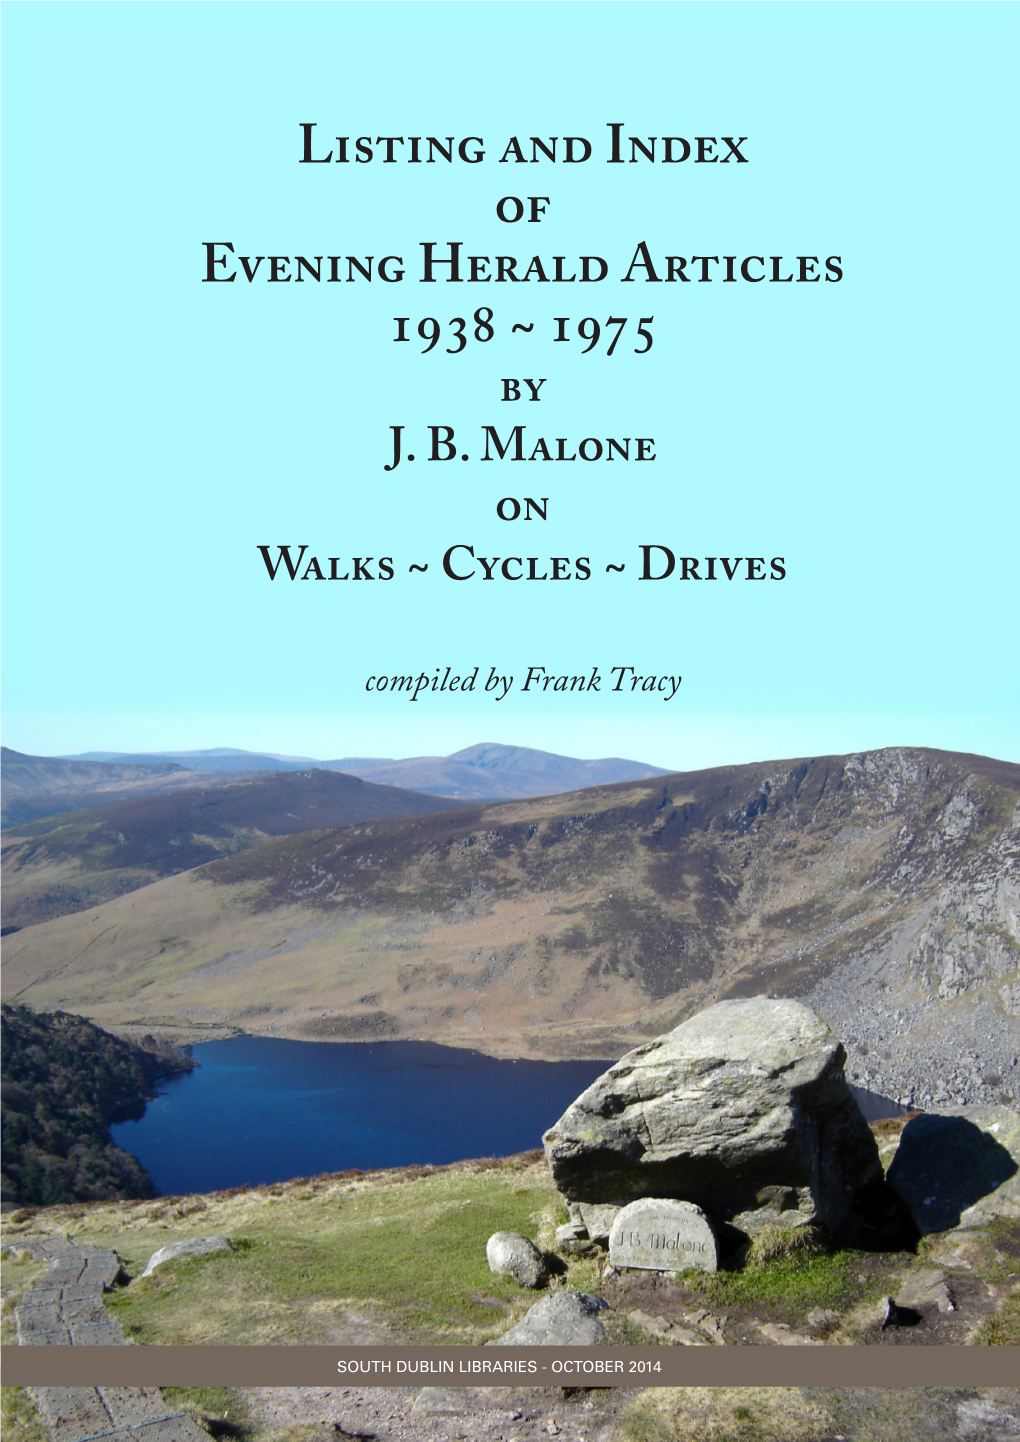 Listing and Index of Evening Herald Articles 1938 ~ 1975 by J